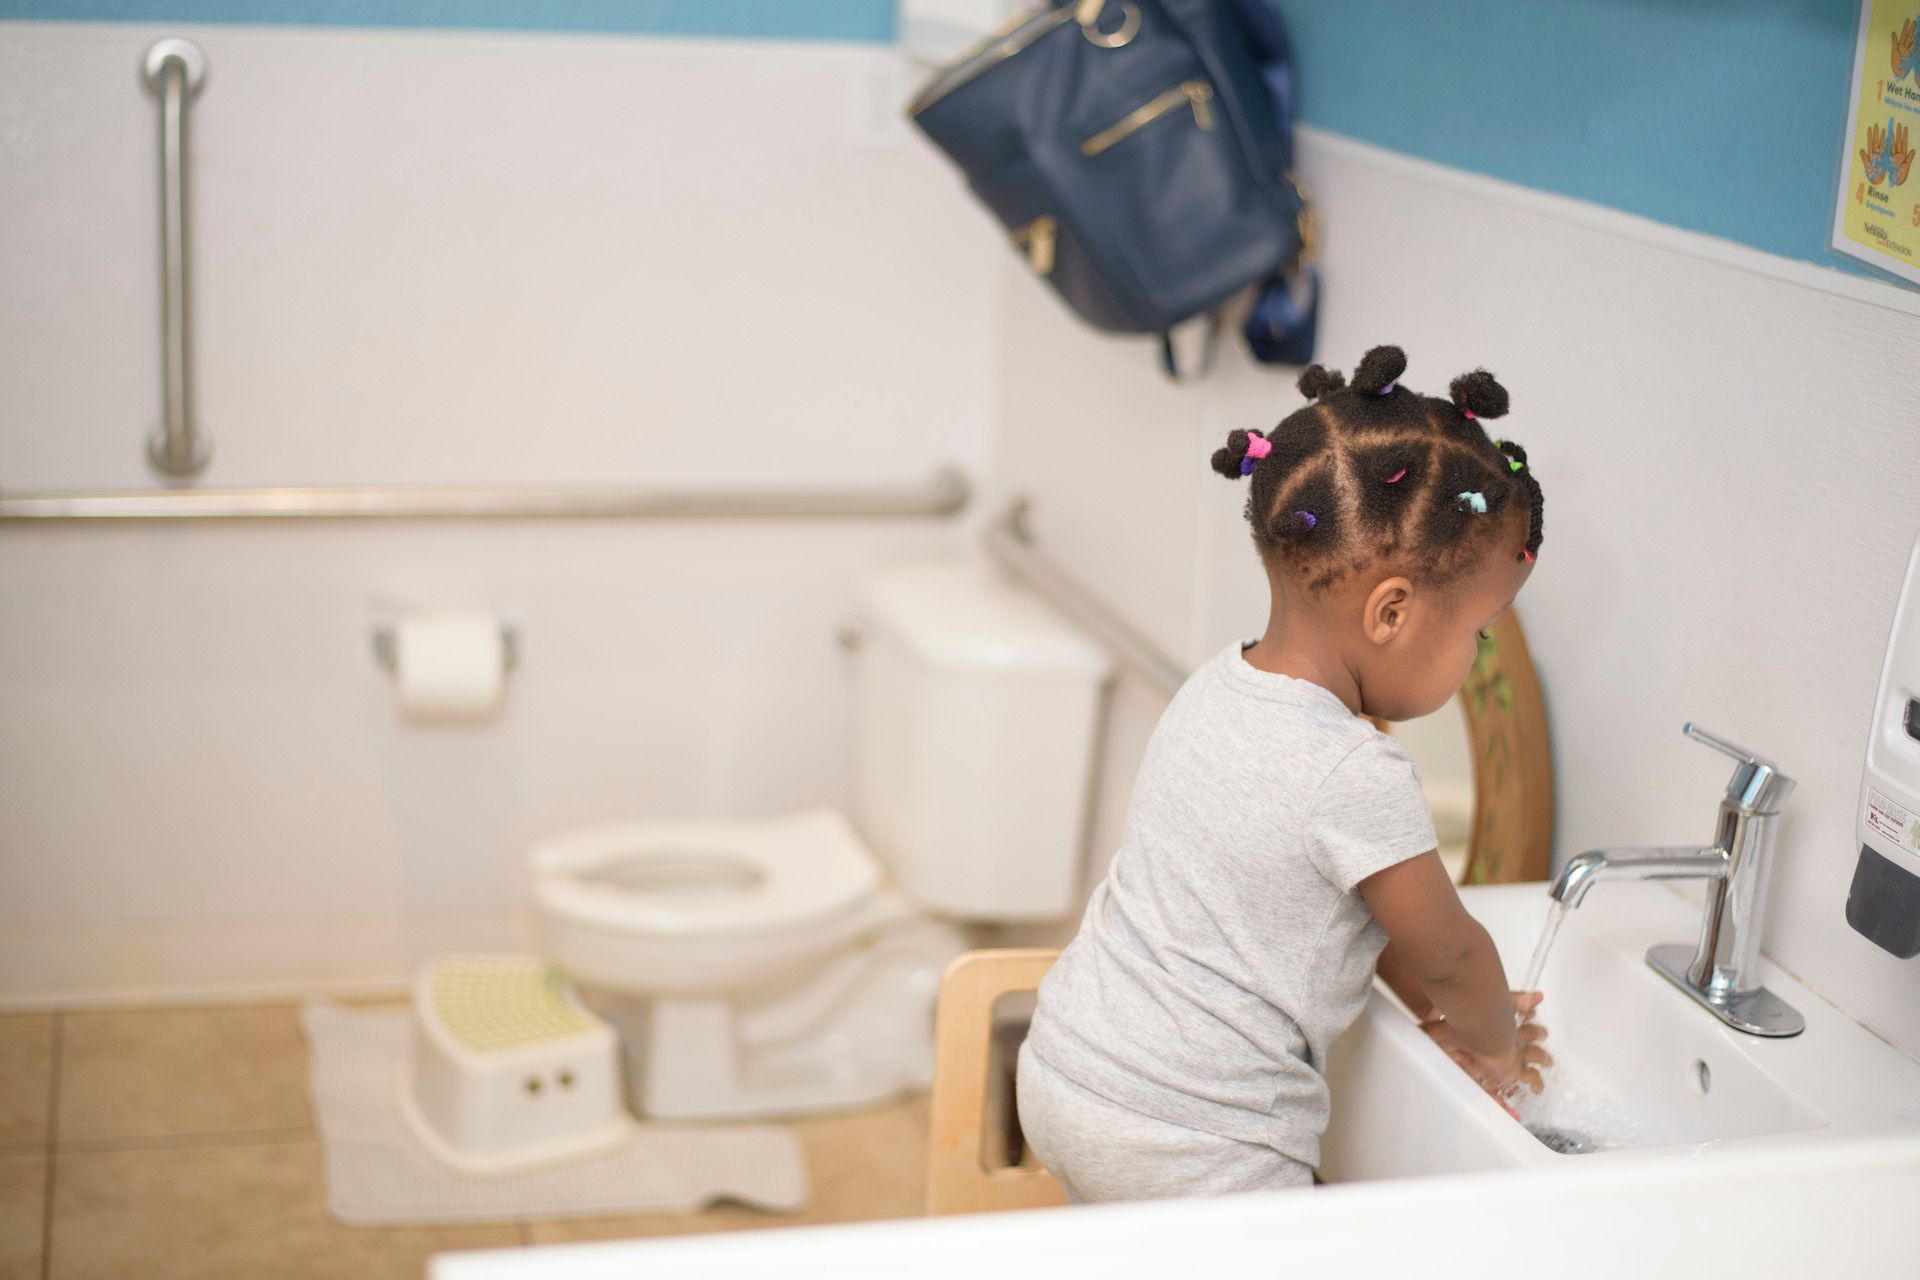 Toilet Learning: The Montessori Way